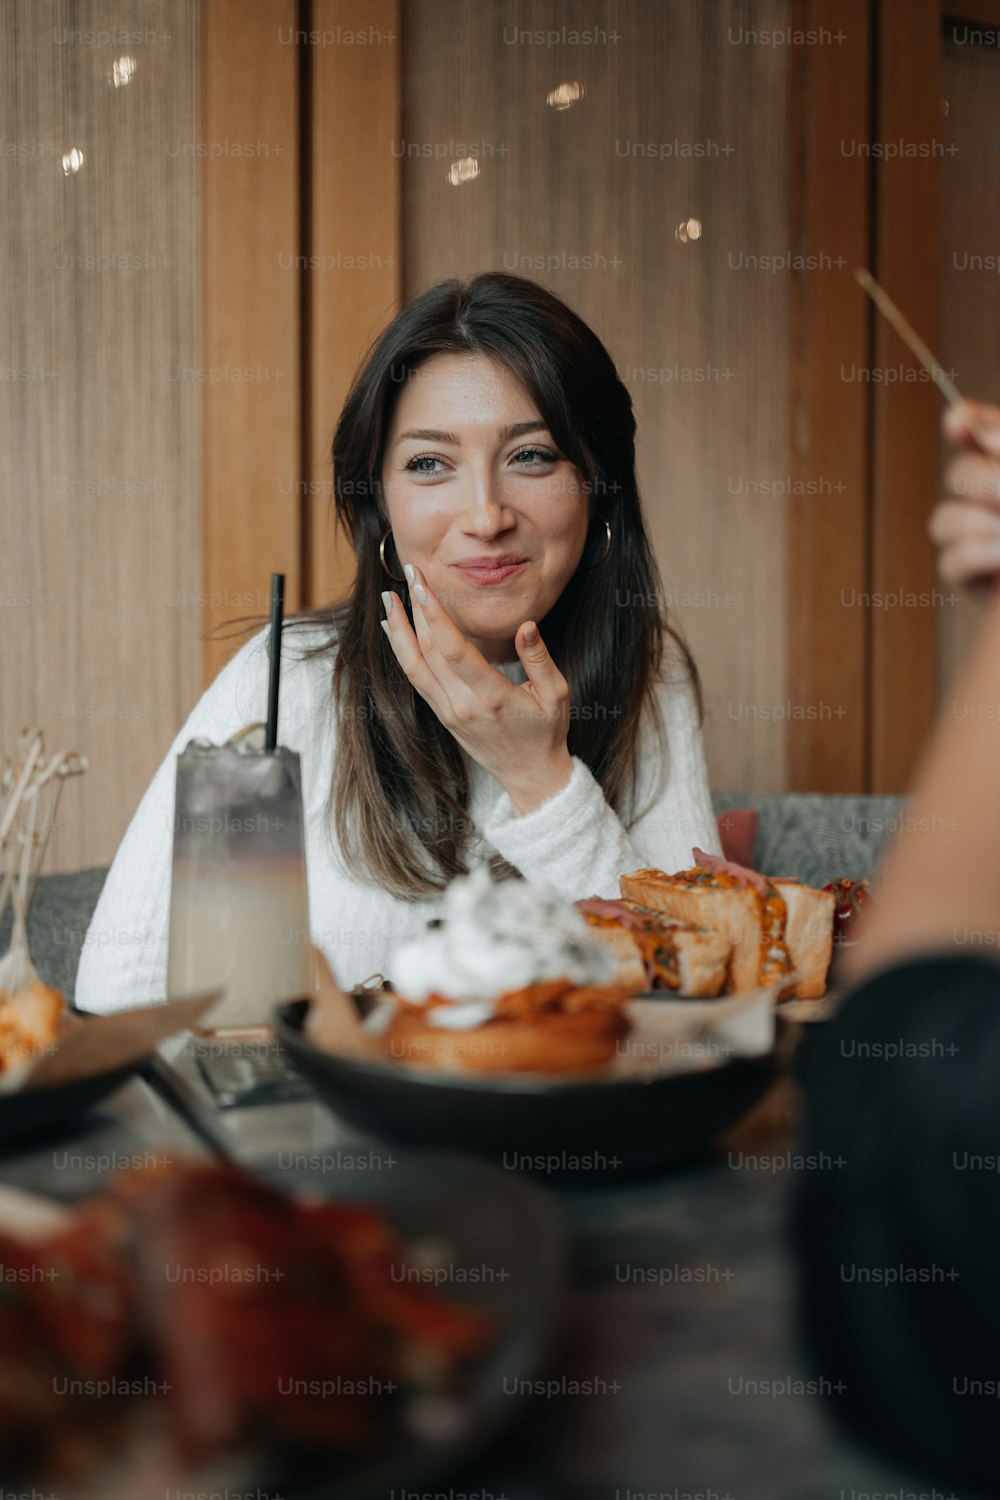 a woman sitting at a table with plates of food